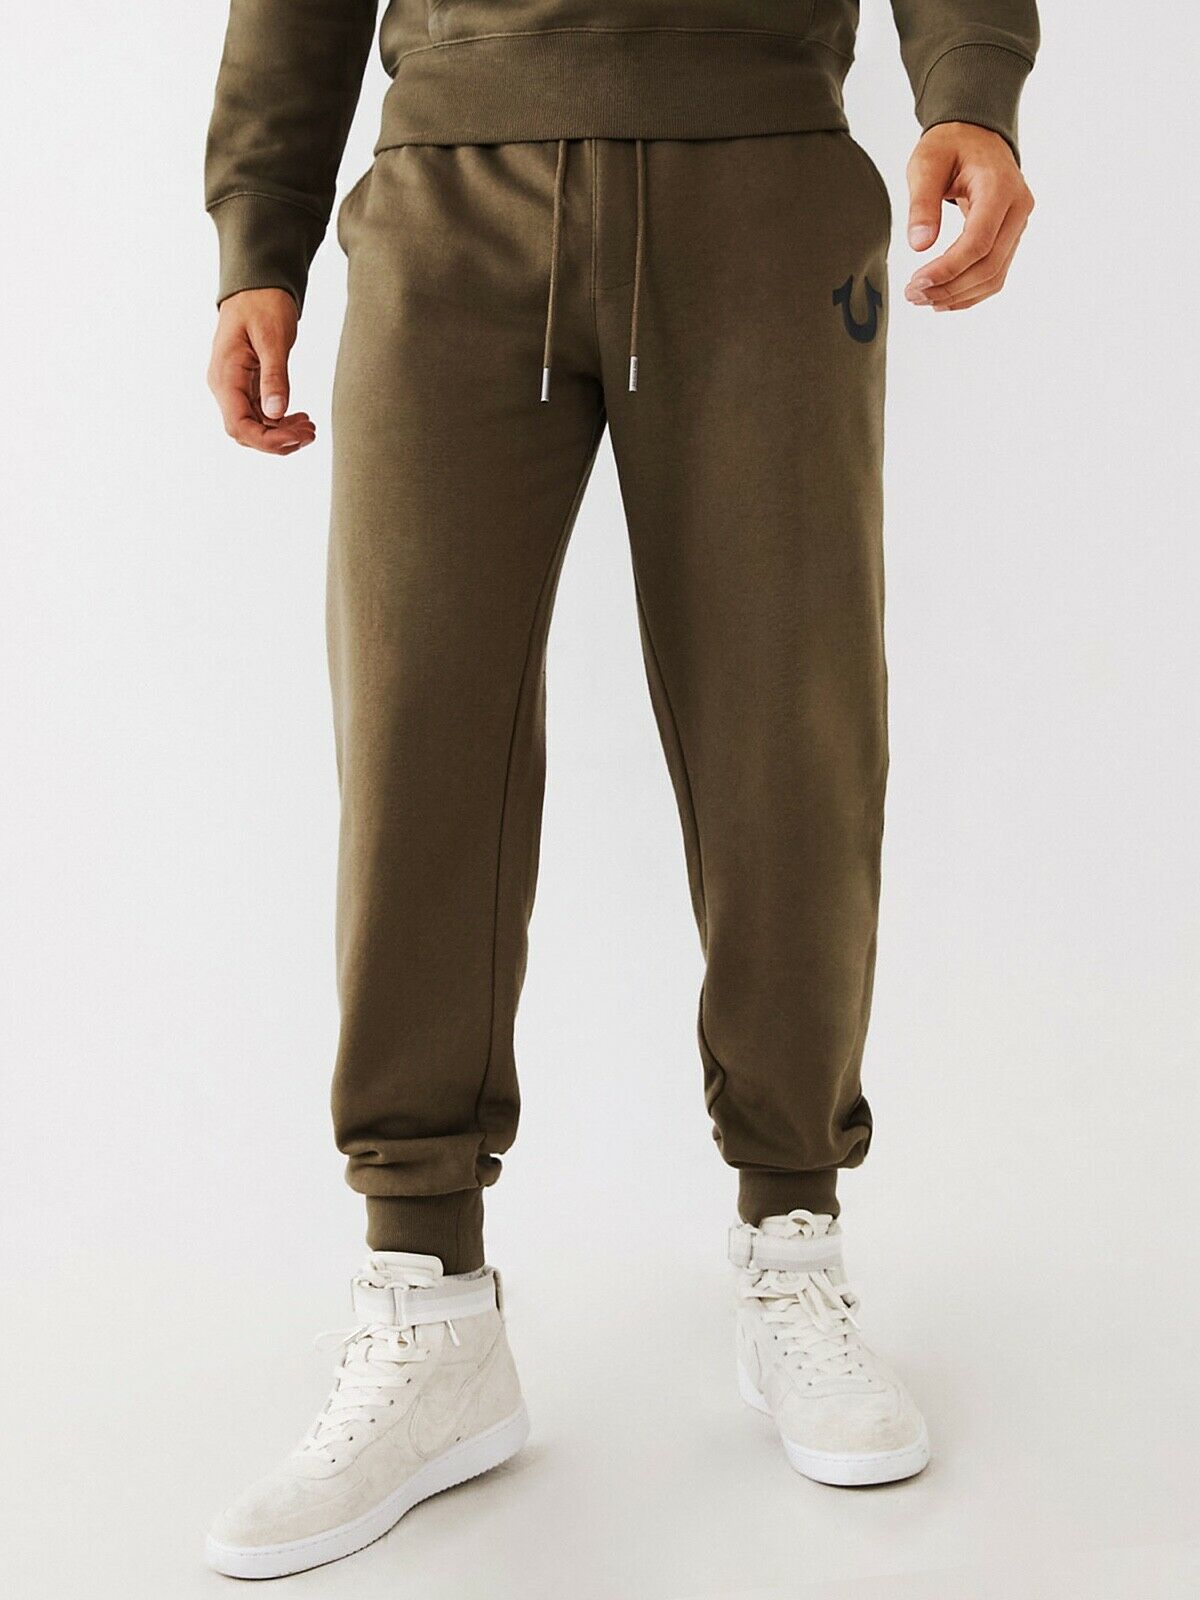 True Religion Men's Logo Tapered Jogger Sweatpants in Taupe 105486 2504